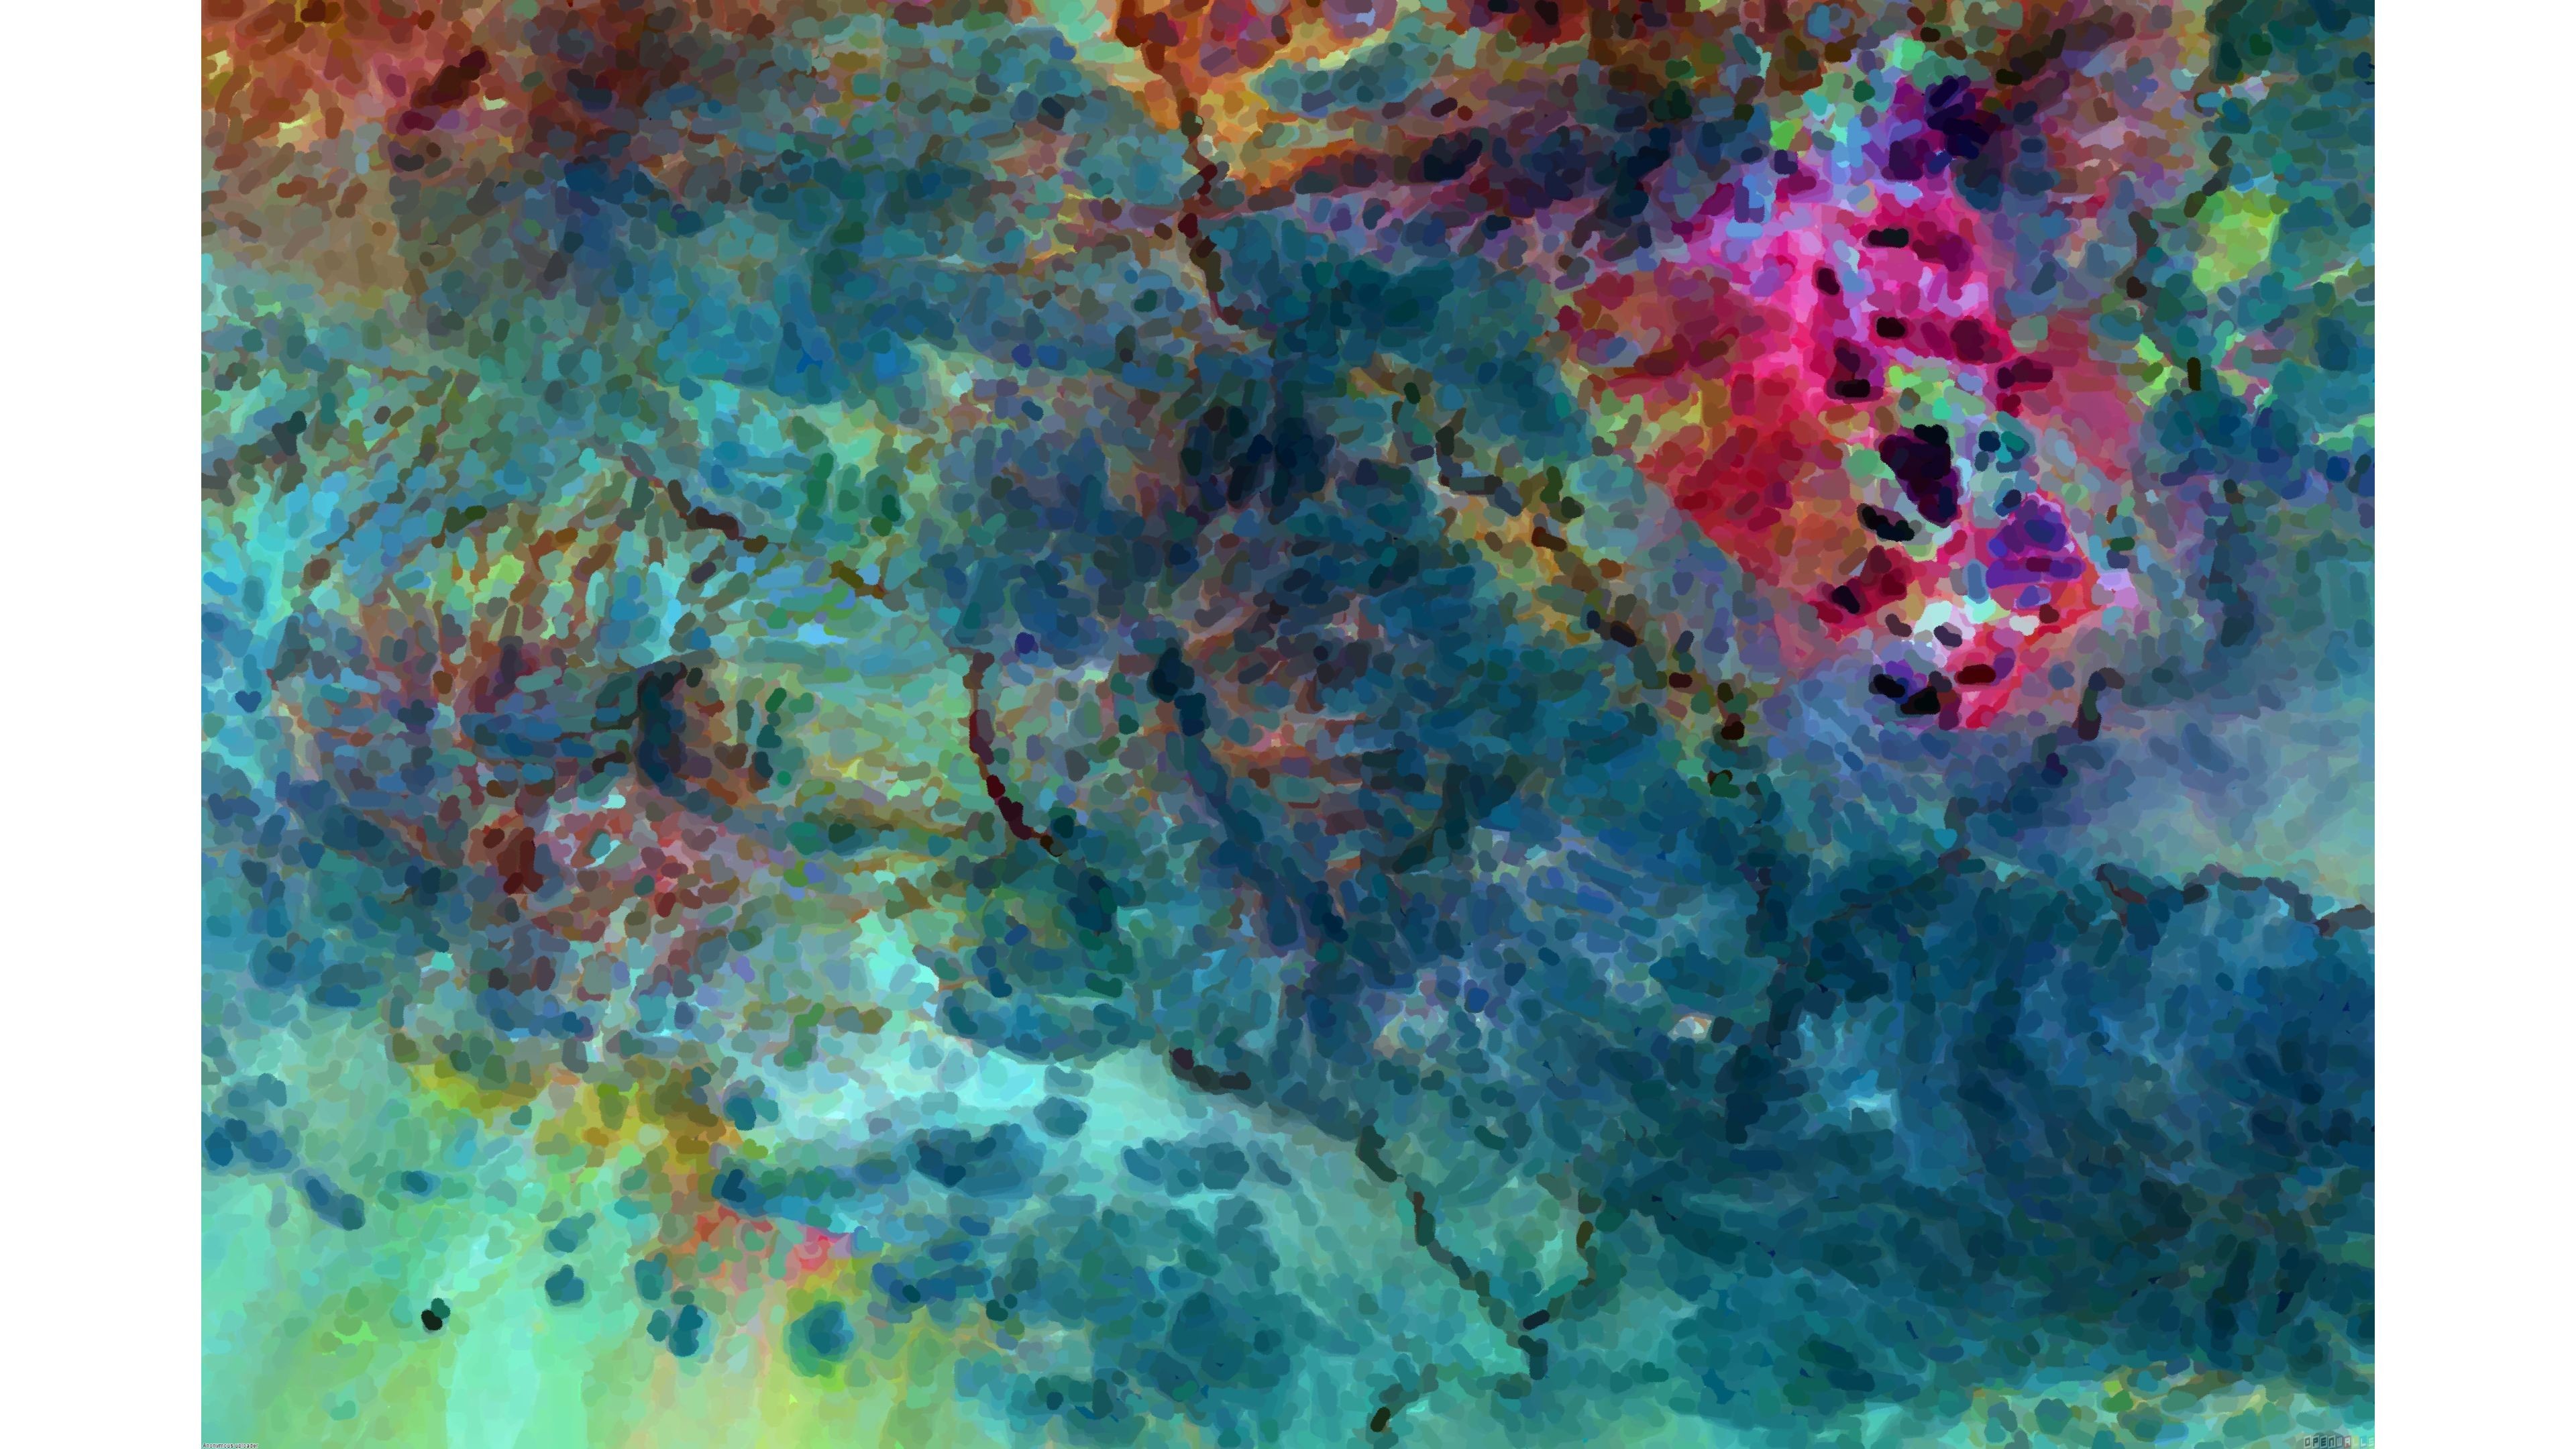 3840x2160 Top Abstract Painting Download - HD Wallpapers